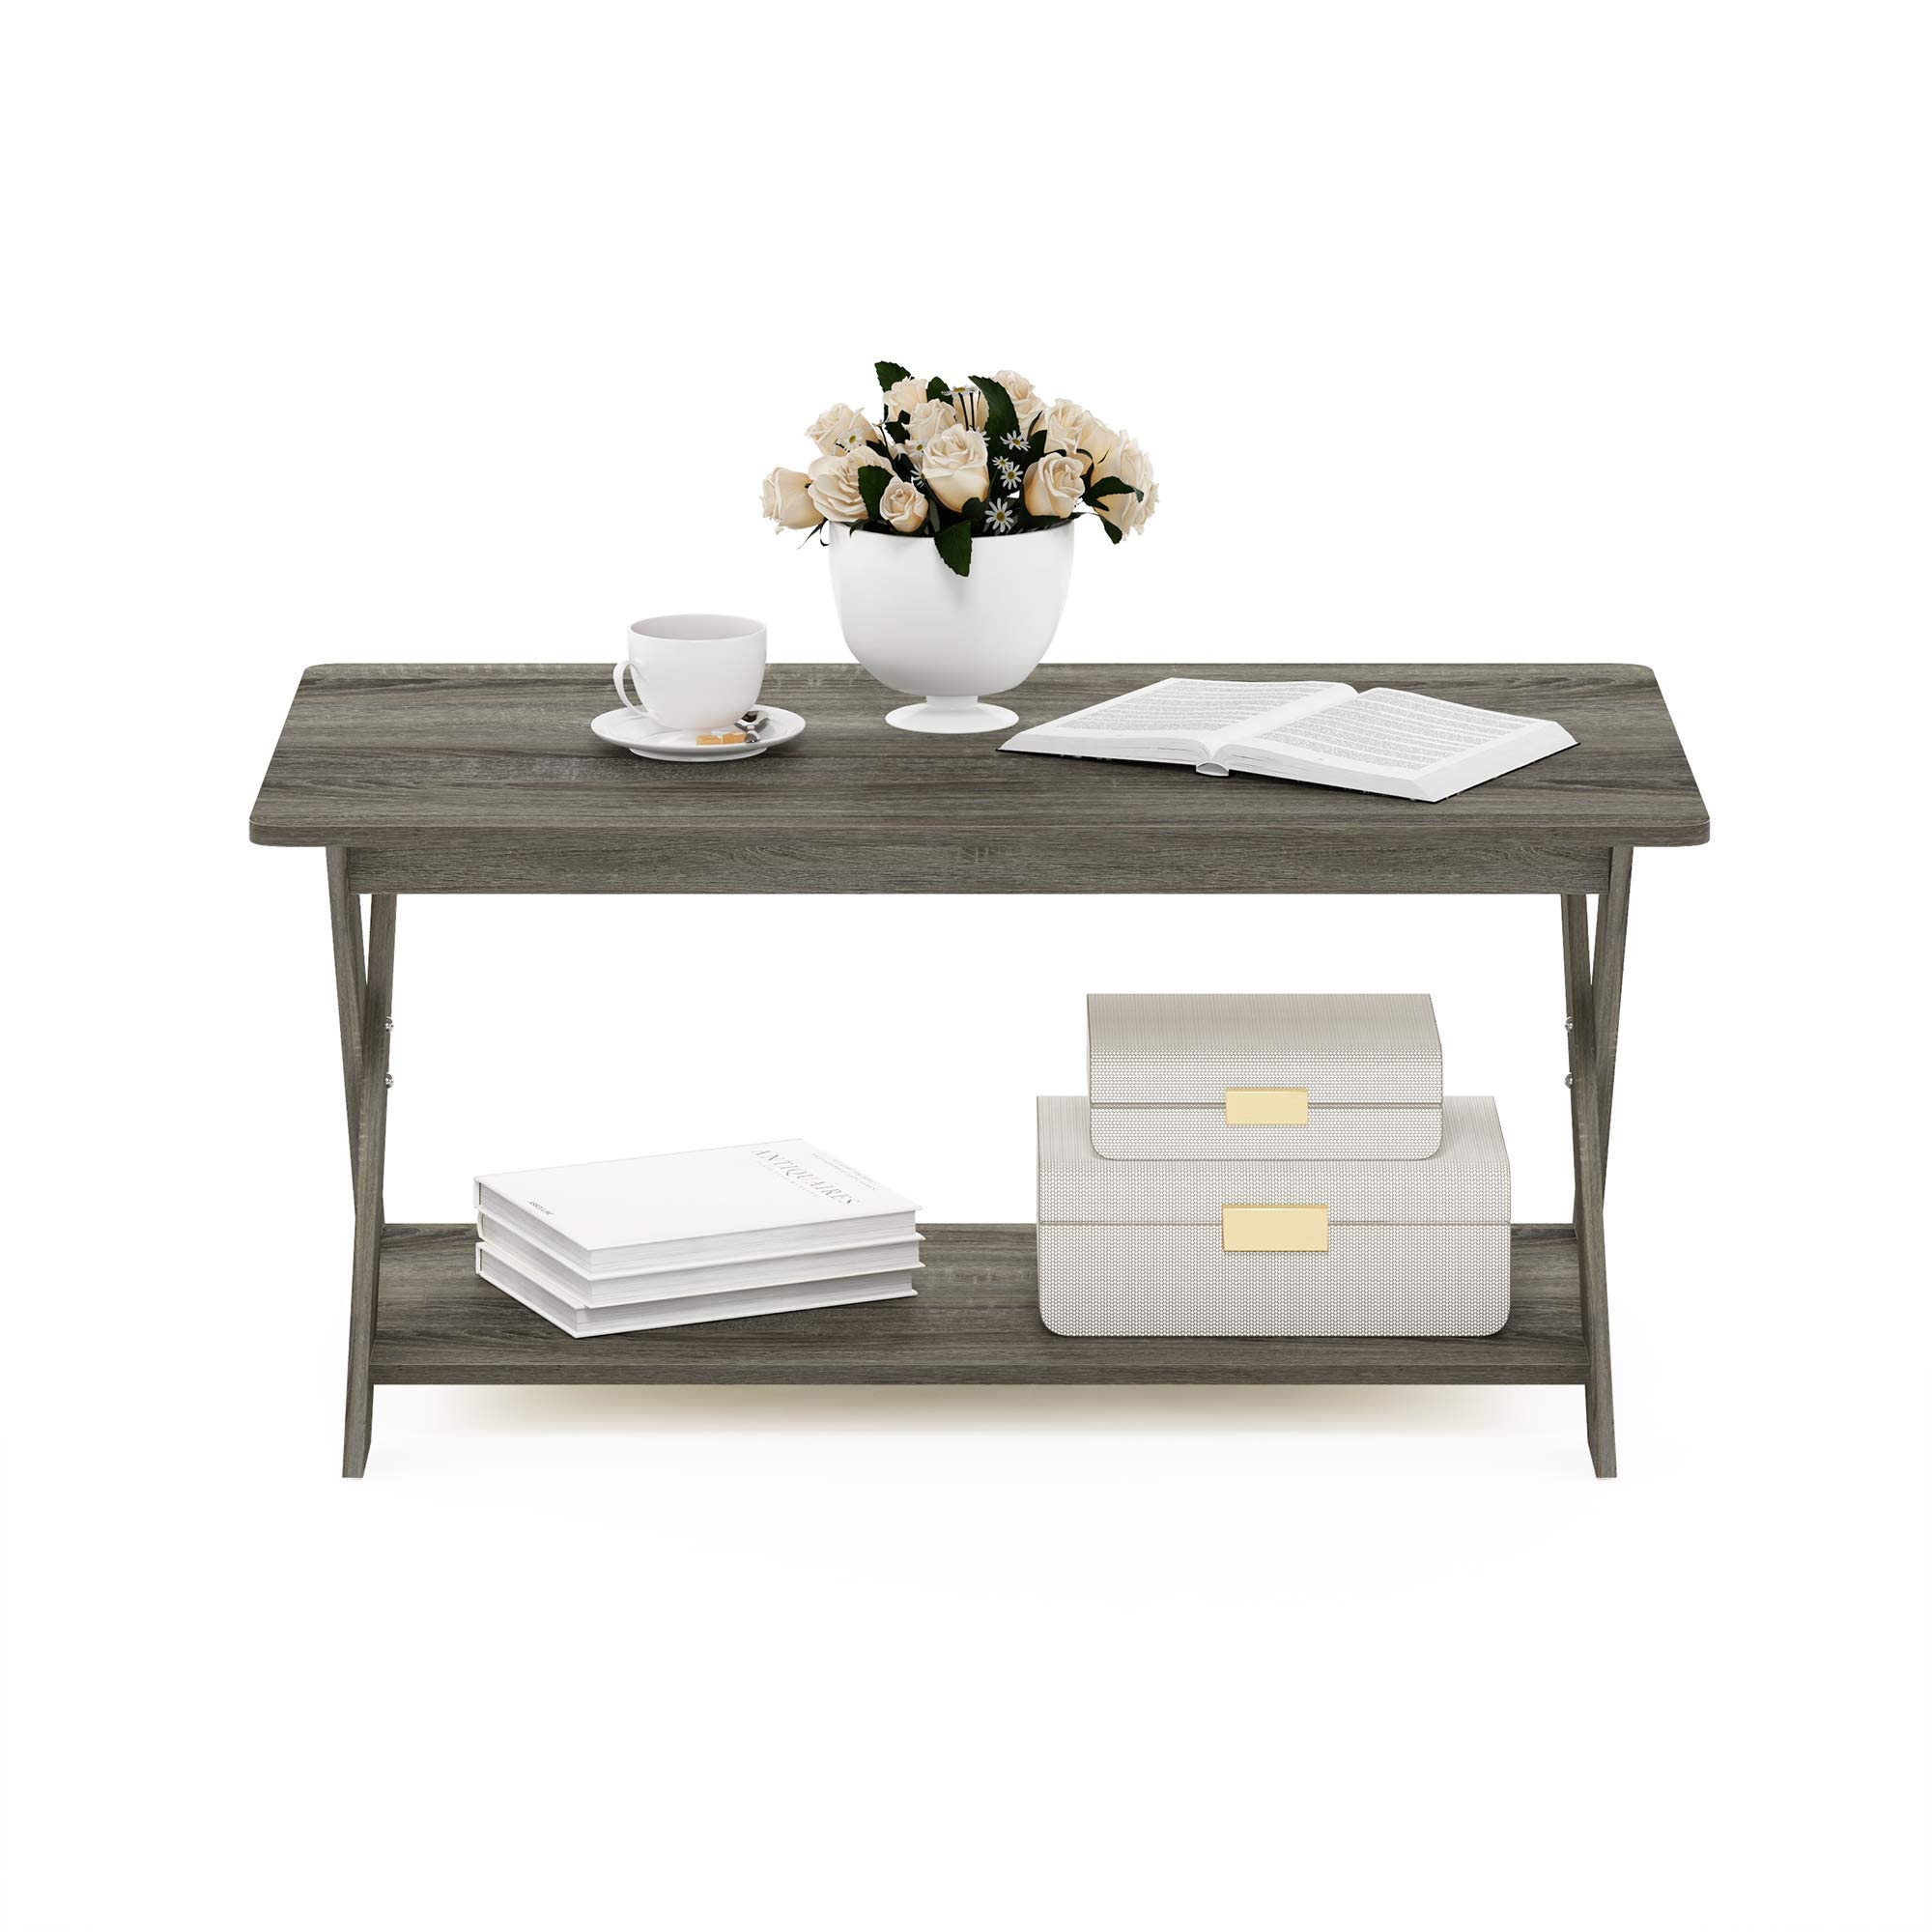 Furinno Modern Simplistic Criss-Crossed Coffee Table, 35.4 in x 19.6 in x 16 in, French Oak Grey $26.32